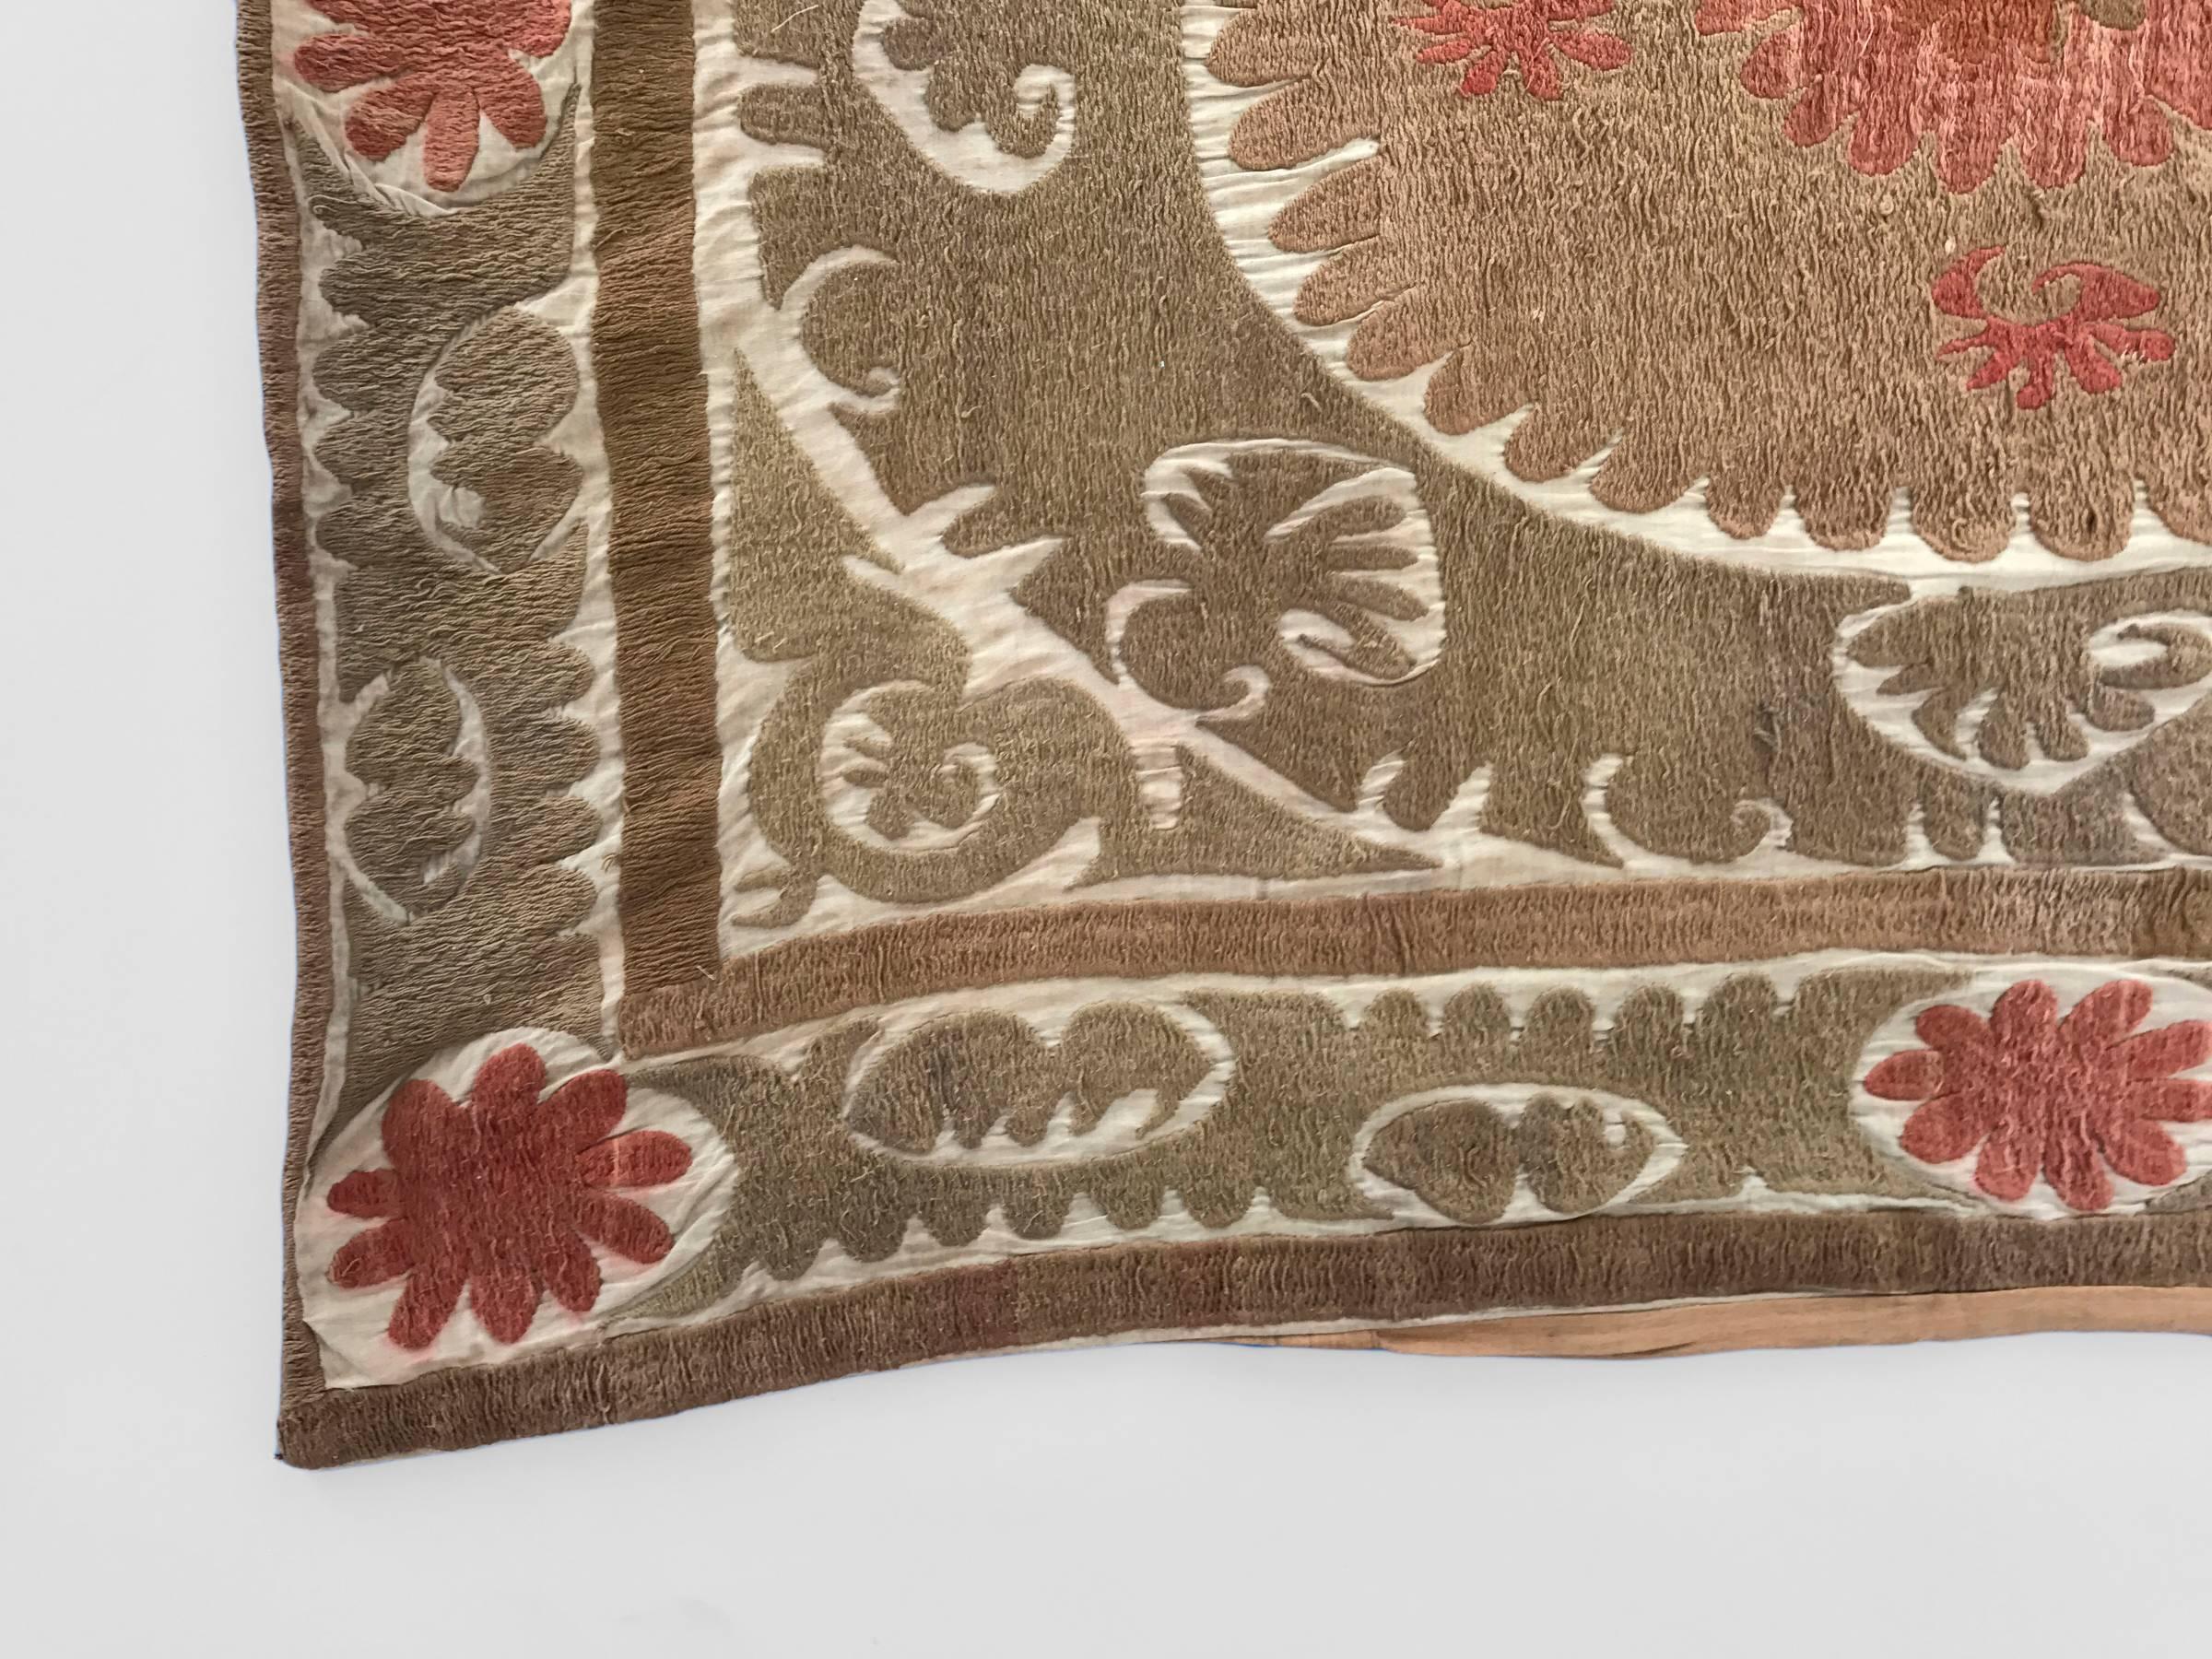 Oversized vintage embroidered Suzani pillow with traditional paisley patterning in shades of brown, tan and pink over a cream background.

Measures: 48 x 40 in.

Perfect for use as a floor, dog or pet pillow.

Pillow is not sold with insert.